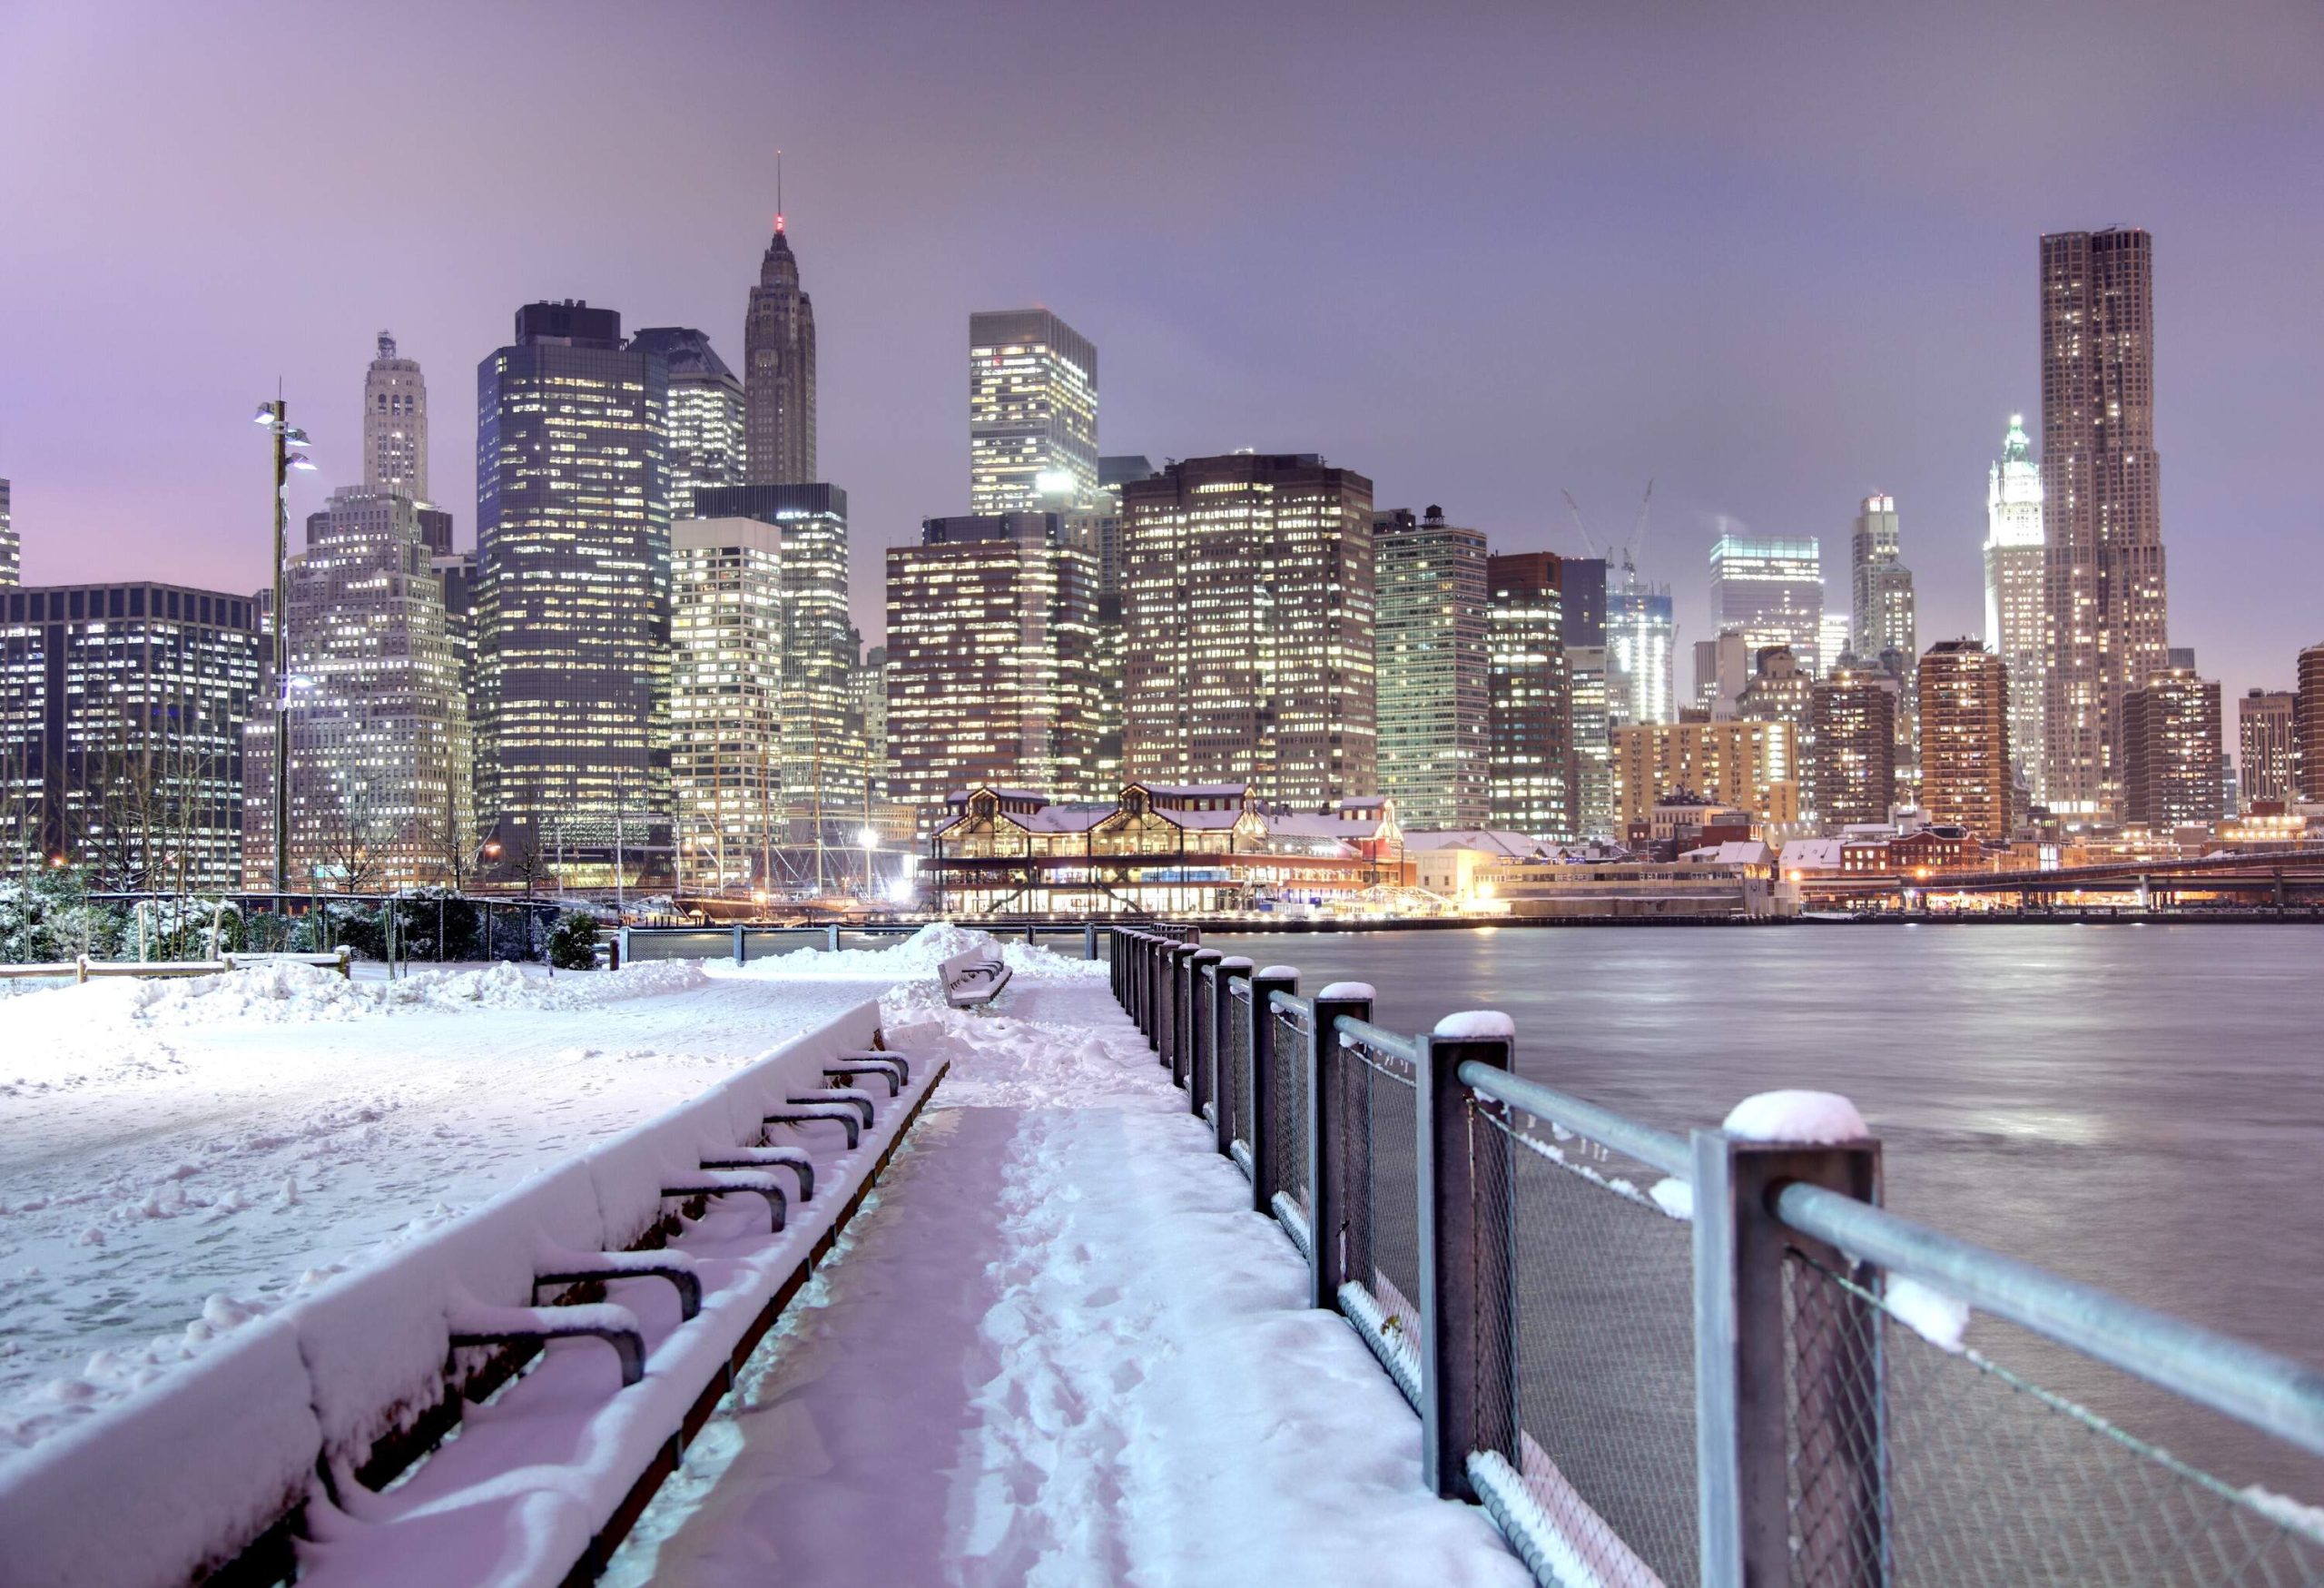 Snow-covered benches on a fenced riverside walkway with views of New York City's illuminated skyline.